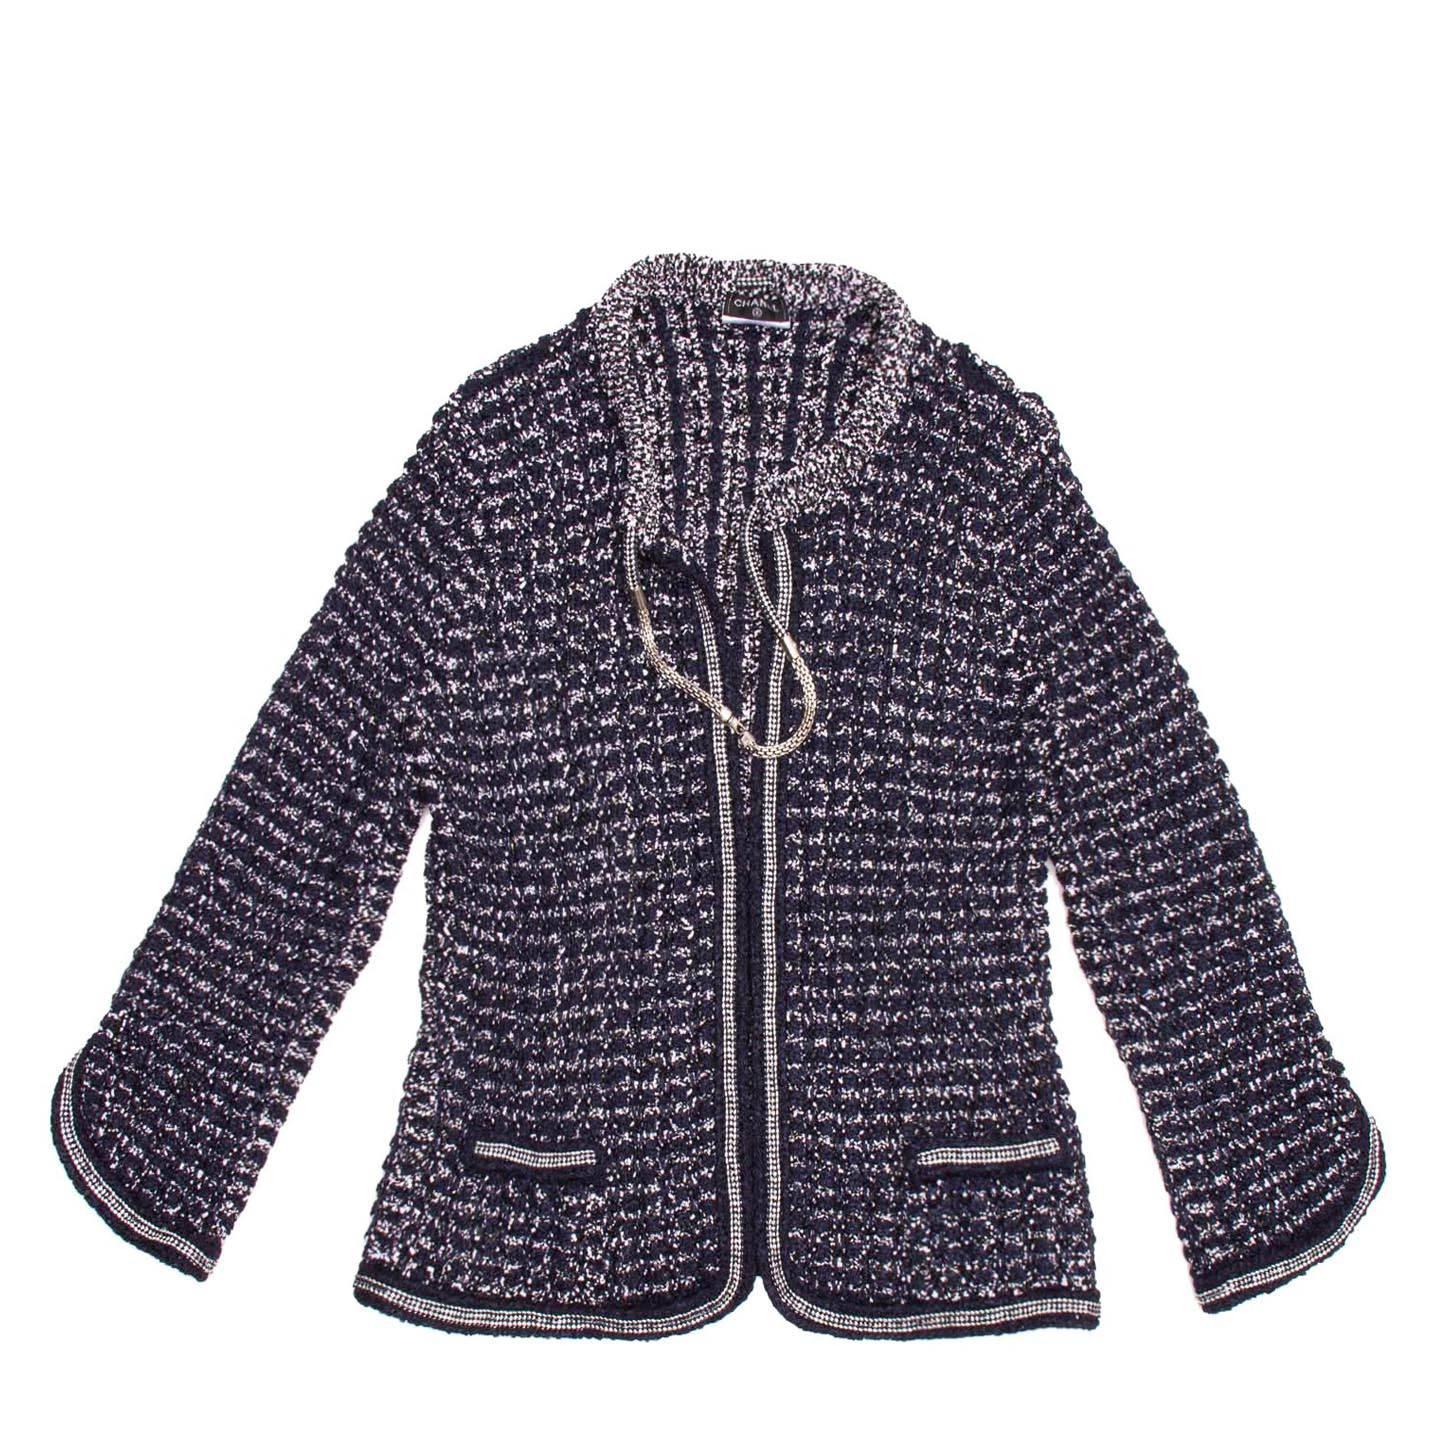 12P Collection: Signature tweed navy blue & white crochet knit cardigan style jacket with silver chain trim detail and drawstring neck closure giving the look of a necklace is attached to the jacket.

Size  42 French sizing

Condition  New and